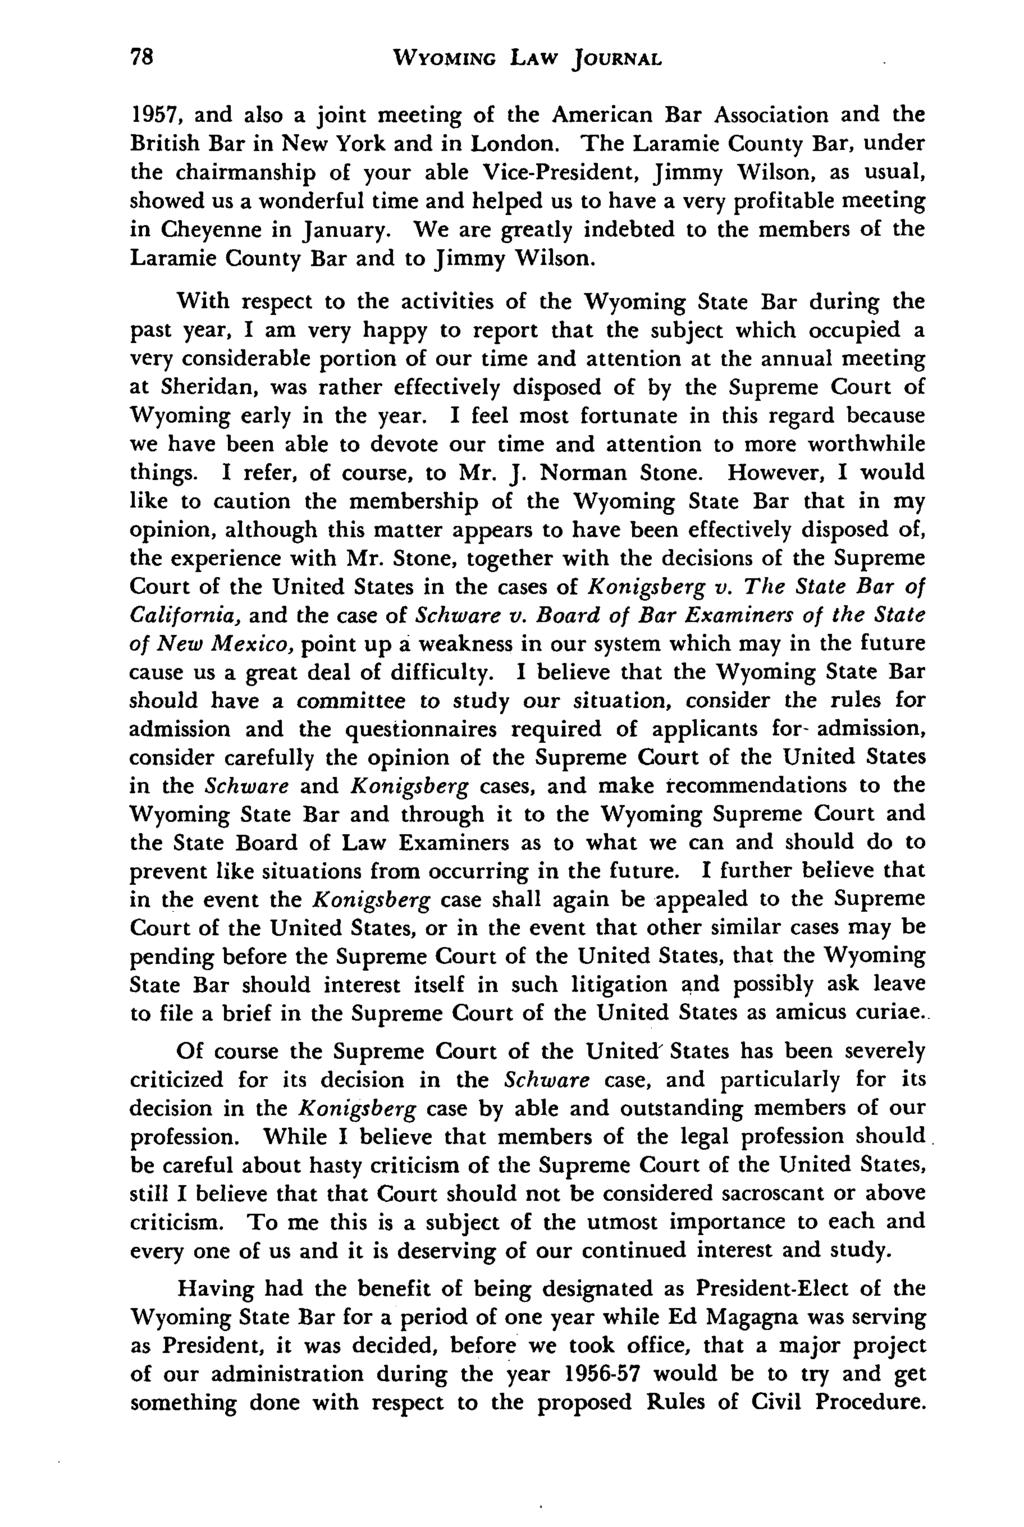 WYOMING LAW JOURNAL 1957, and also a joint meeting of the American Bar Association and the British Bar in New York and in London.